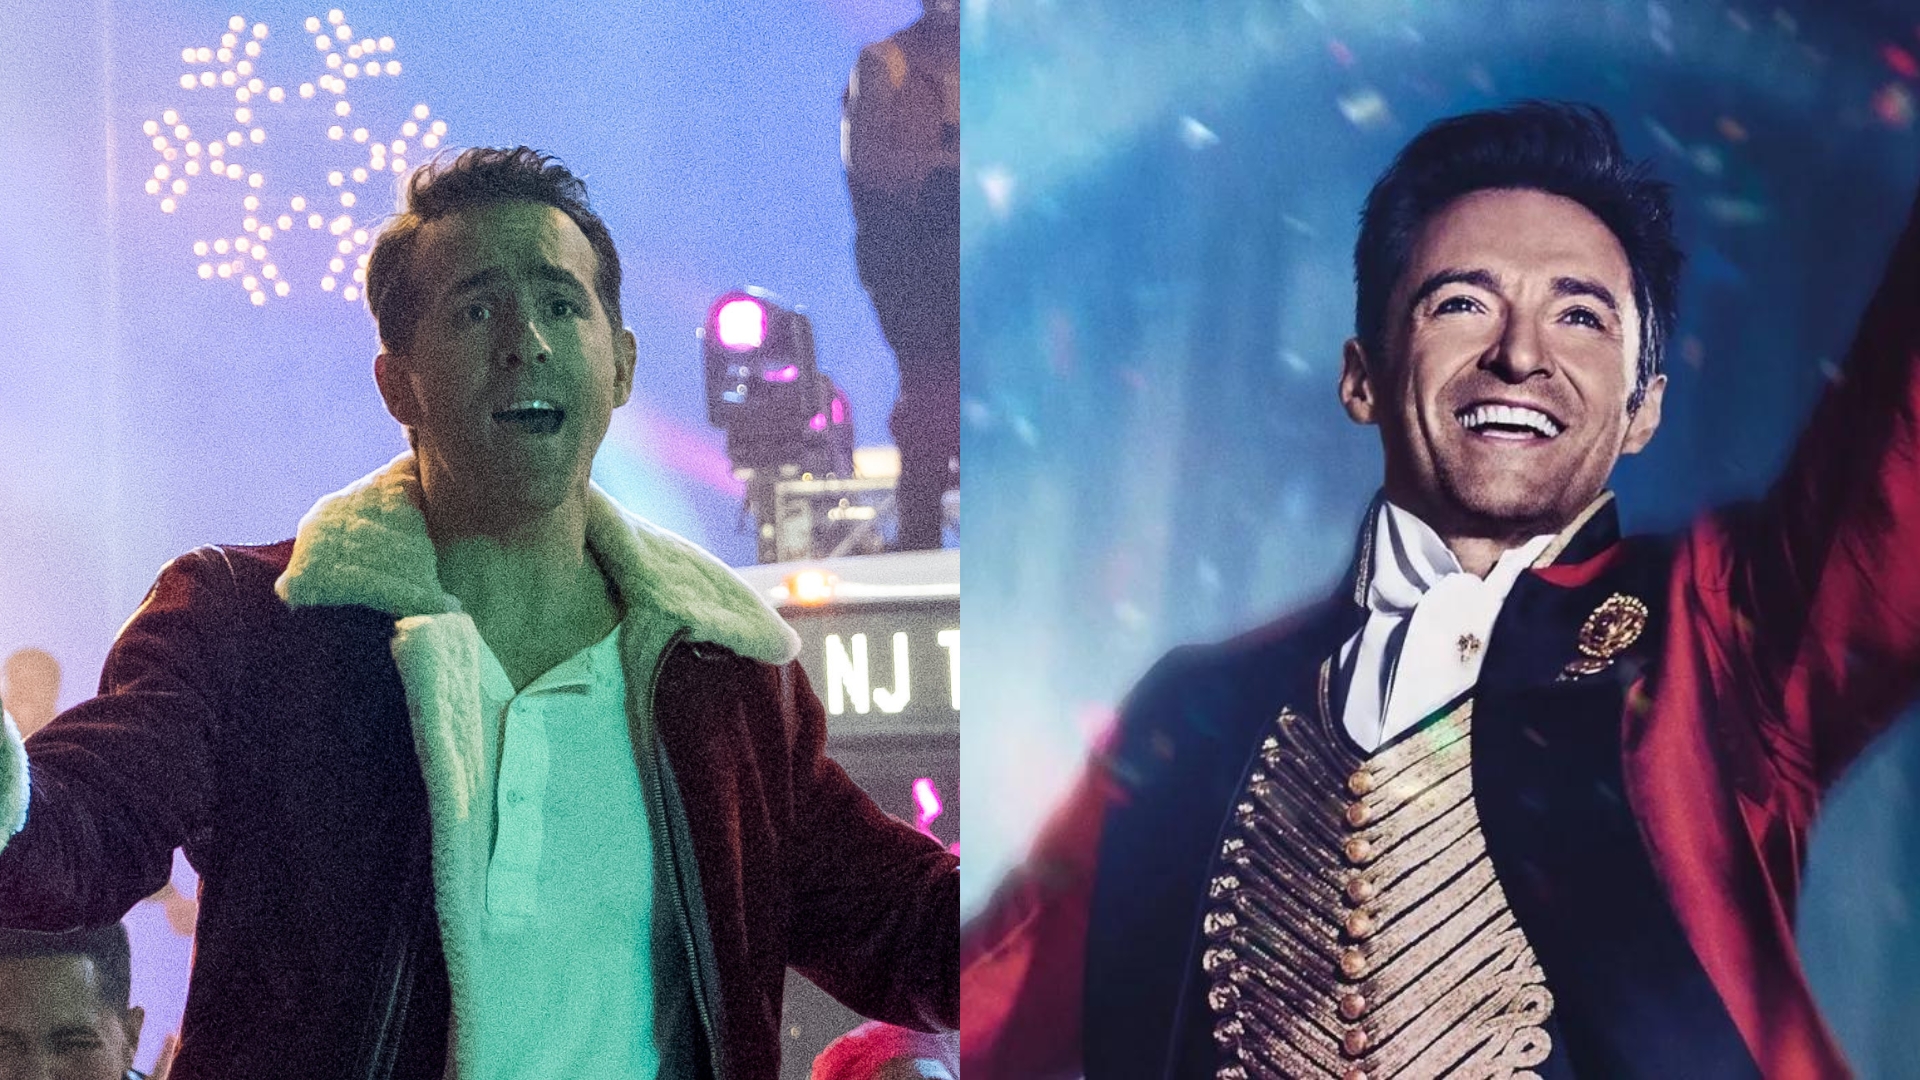 Ryan Reynolds in Spirited, and Hugh Jackman in The Greatest Showman